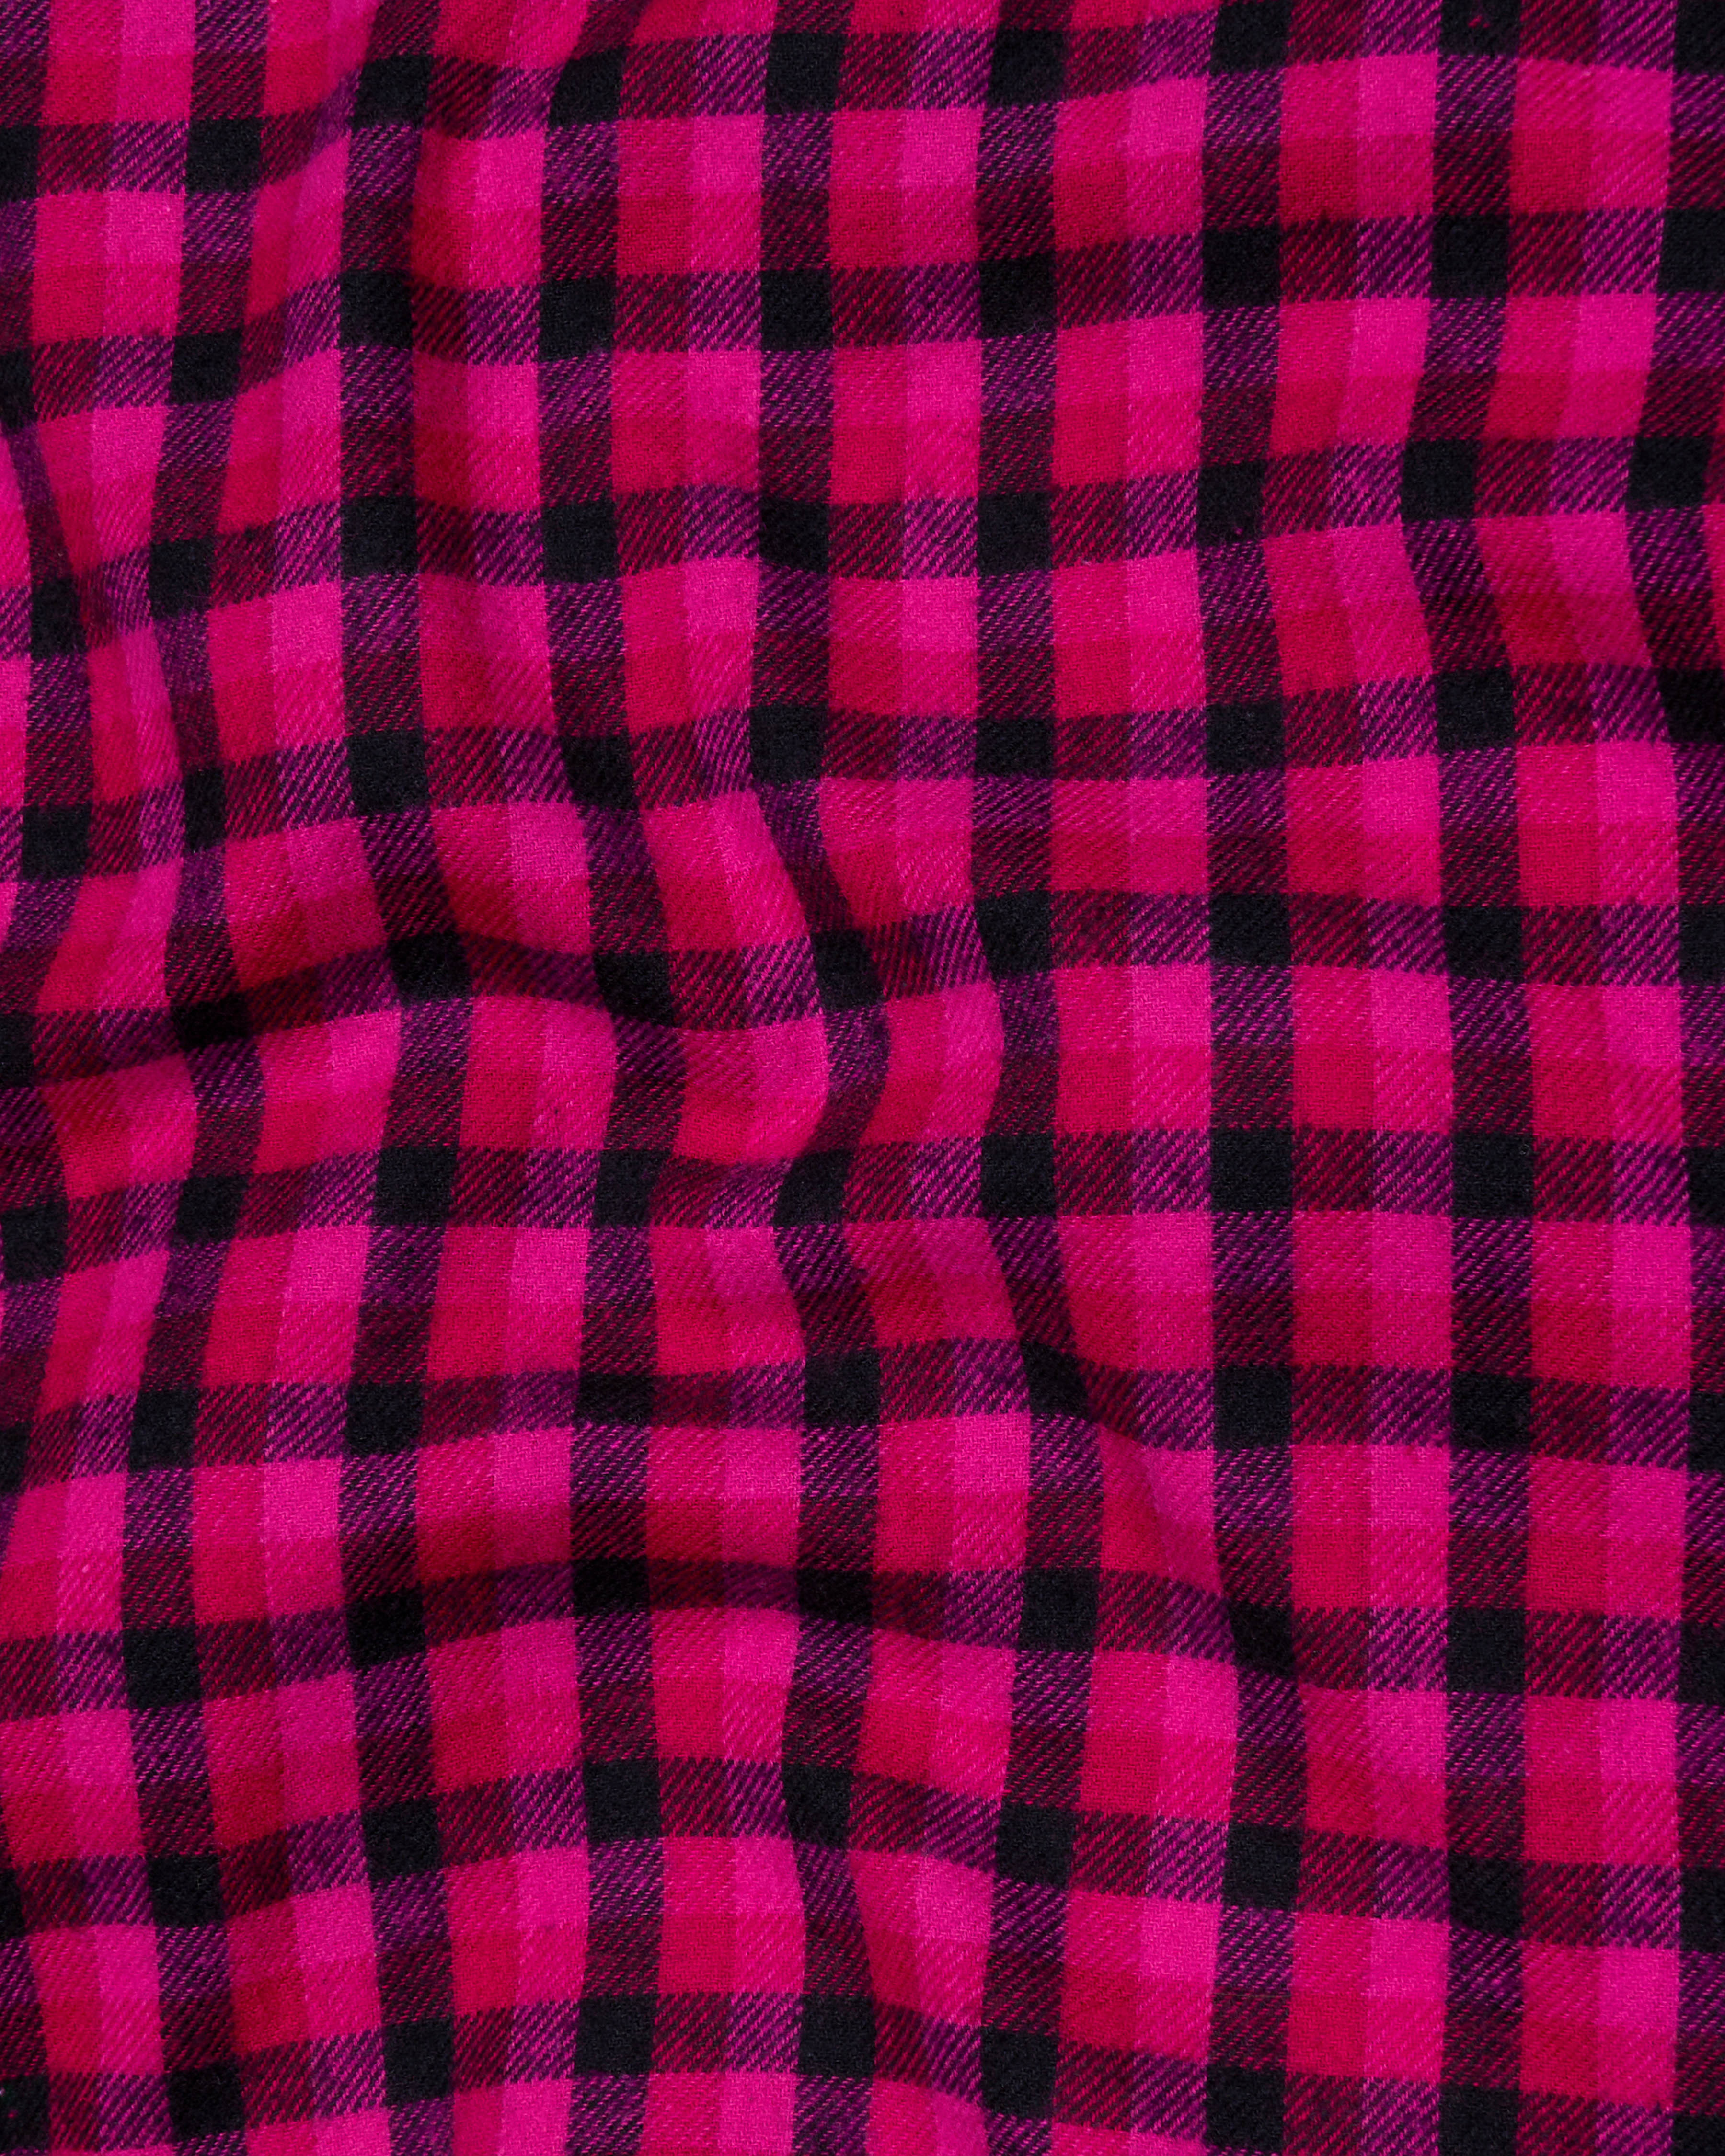 Raspberry Red with Black Checkered Flannel Shirt 9691-BLK-38, 9691-BLK-H-38, 9691-BLK-39, 9691-BLK-H-39, 9691-BLK-40, 9691-BLK-H-40, 9691-BLK-42, 9691-BLK-H-42, 9691-BLK-44, 9691-BLK-H-44, 9691-BLK-46, 9691-BLK-H-46, 9691-BLK-48, 9691-BLK-H-48, 9691-BLK-50, 9691-BLK-H-50, 9691-BLK-52, 9691-BLK-H-52